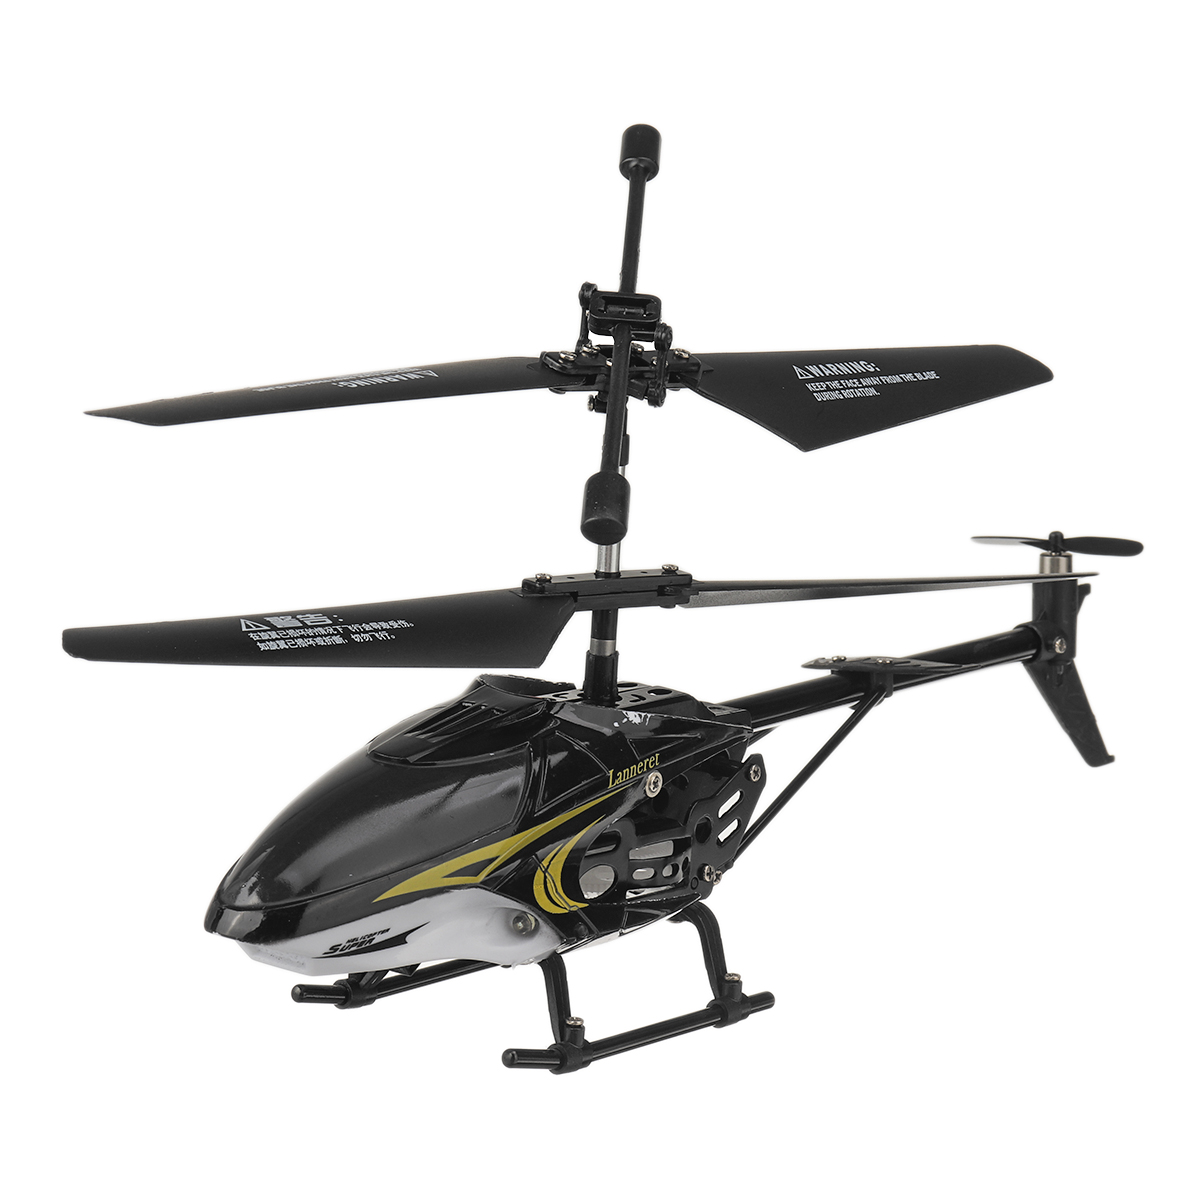 35CH-Alloy-Fall-Resistant-USB-Charging-Lock-tail-Gyroscope-Remote-Control-Helicopter-1846822-4